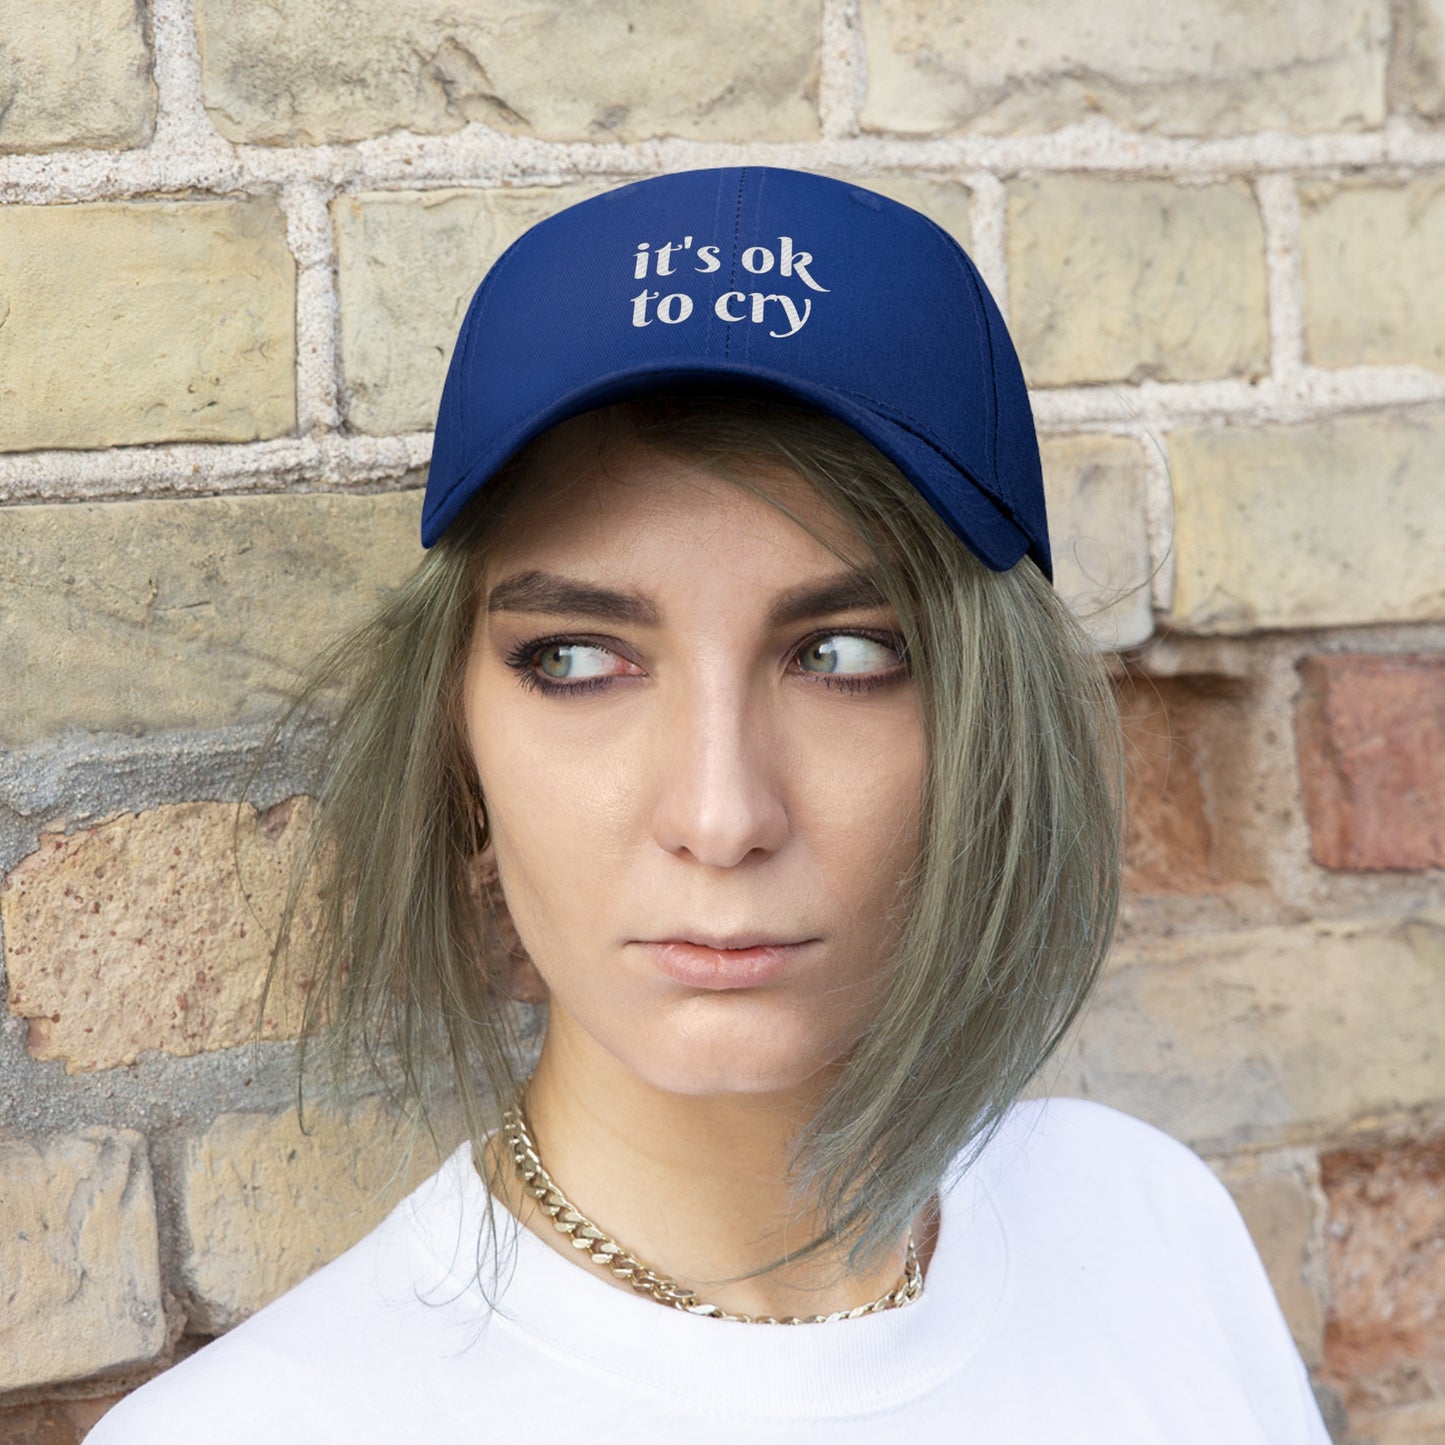 Embrace Your Emotions" Embroidered Hat - "It's Okay to Cry"